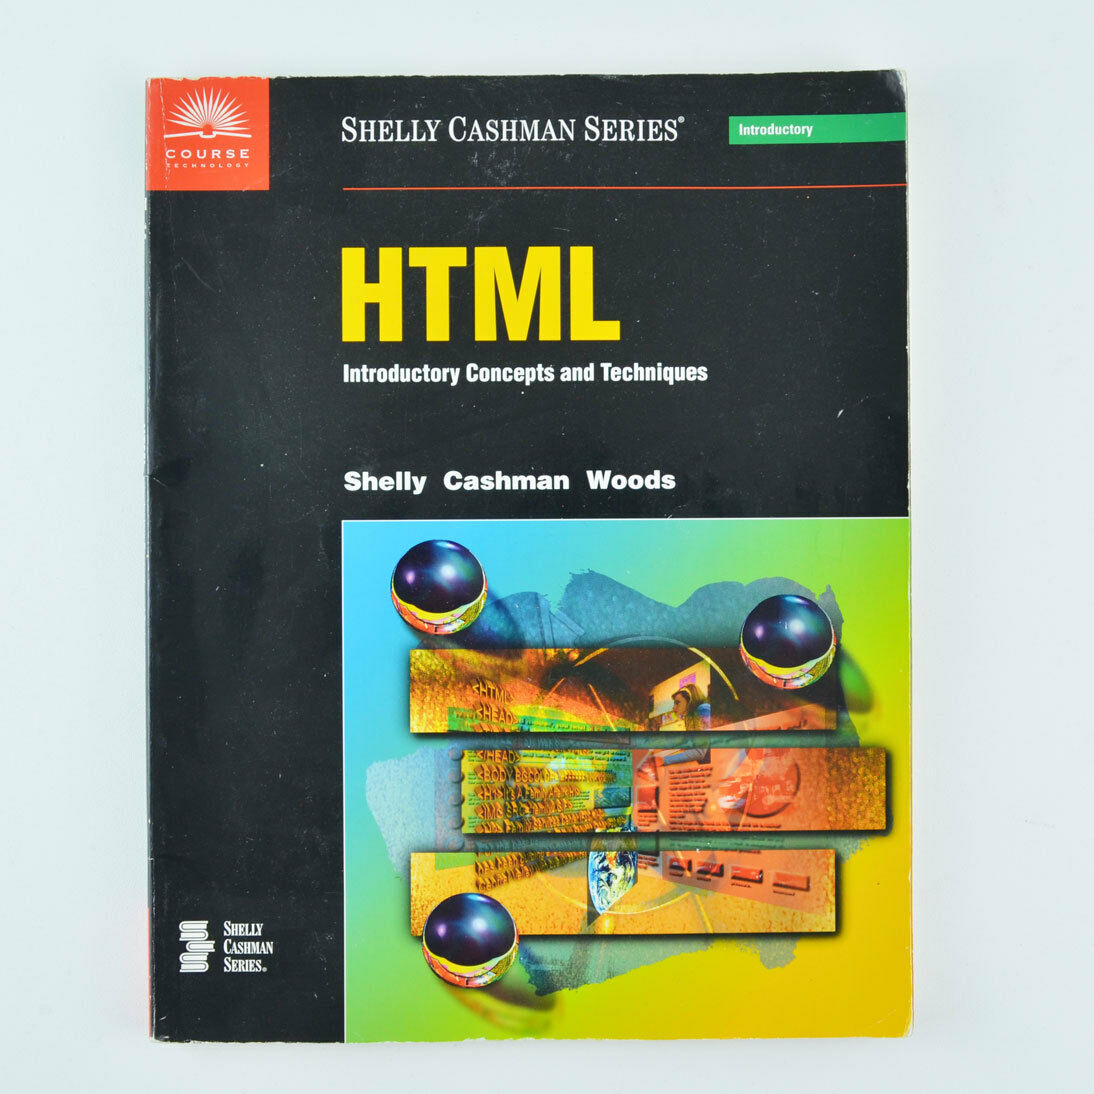 HTML Introductory Concepts and Techniques by Gary B. Shelly and Thomas J. Cashma